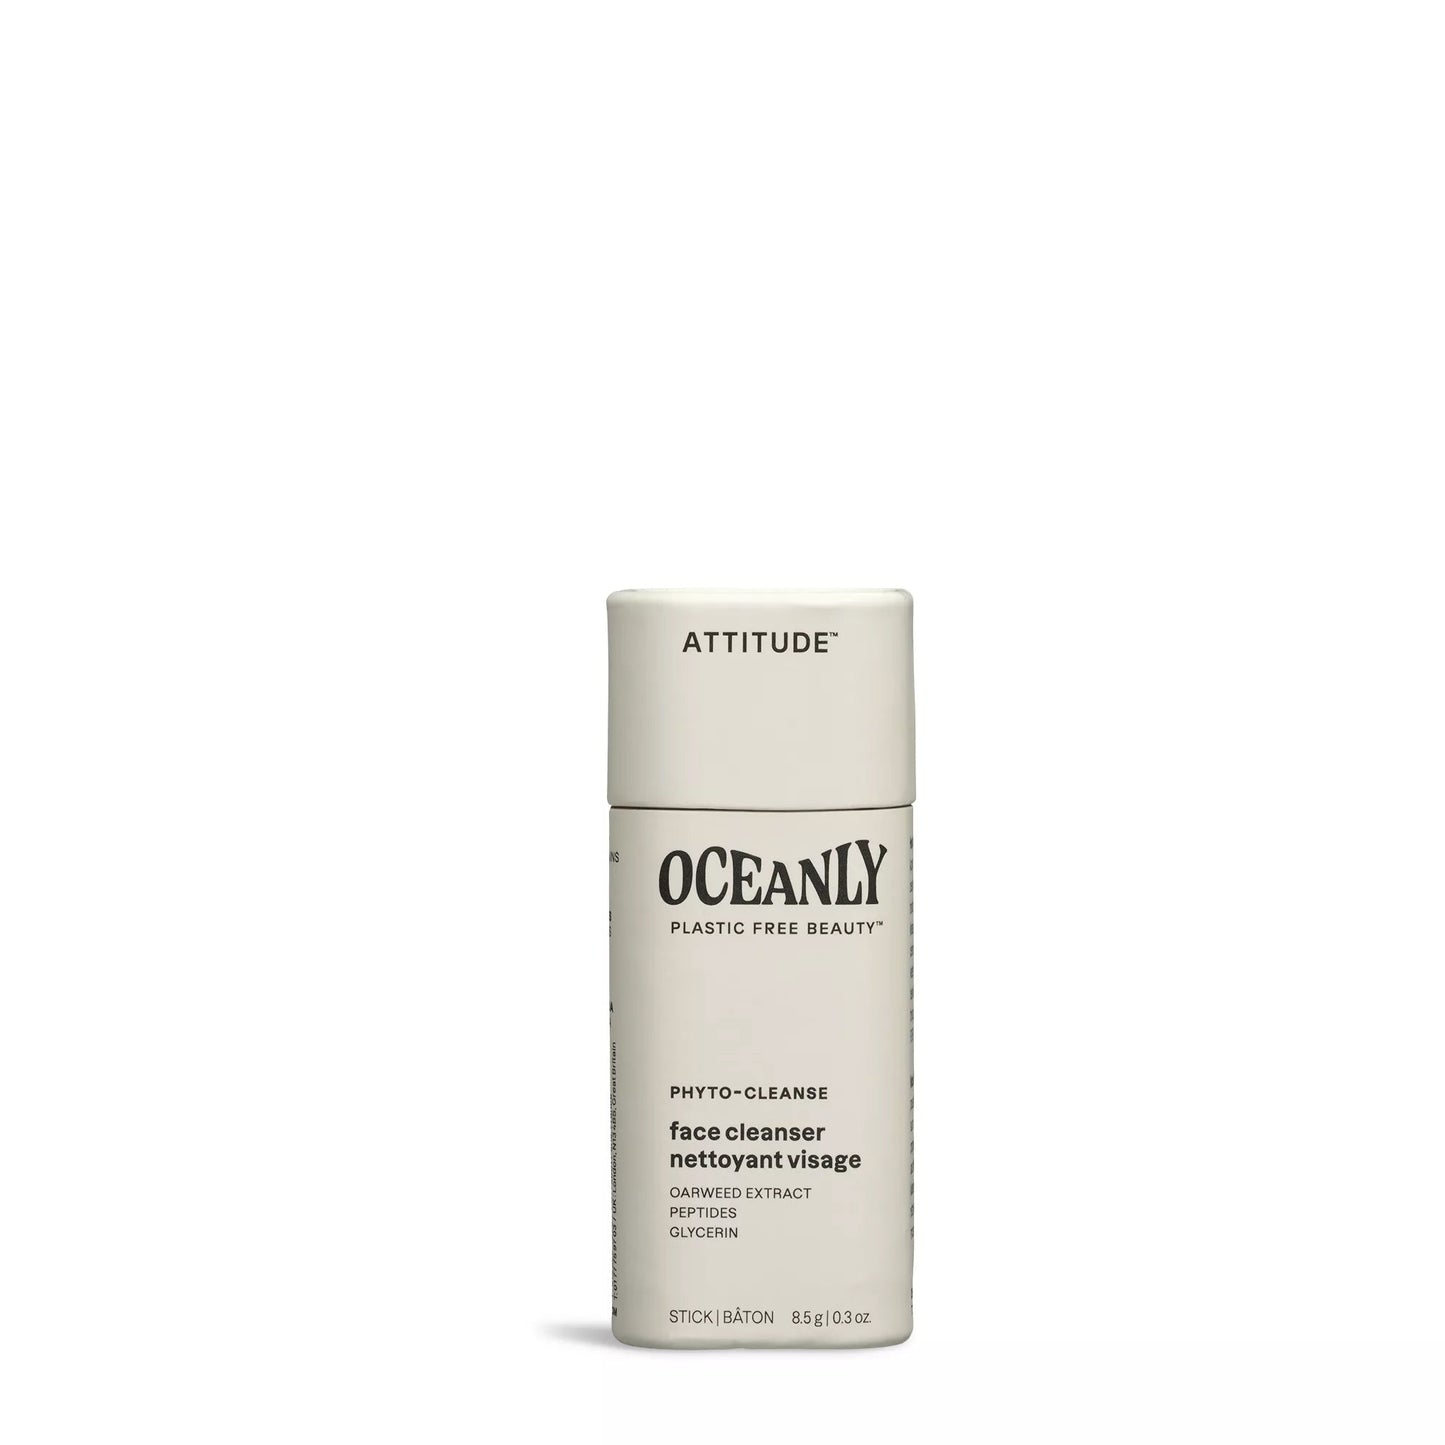 ATTITUDE Oceanly Phyto-Cleanse Mini Face Cleanser Unscented 8.5g 16084_en? Unscented 8.5g